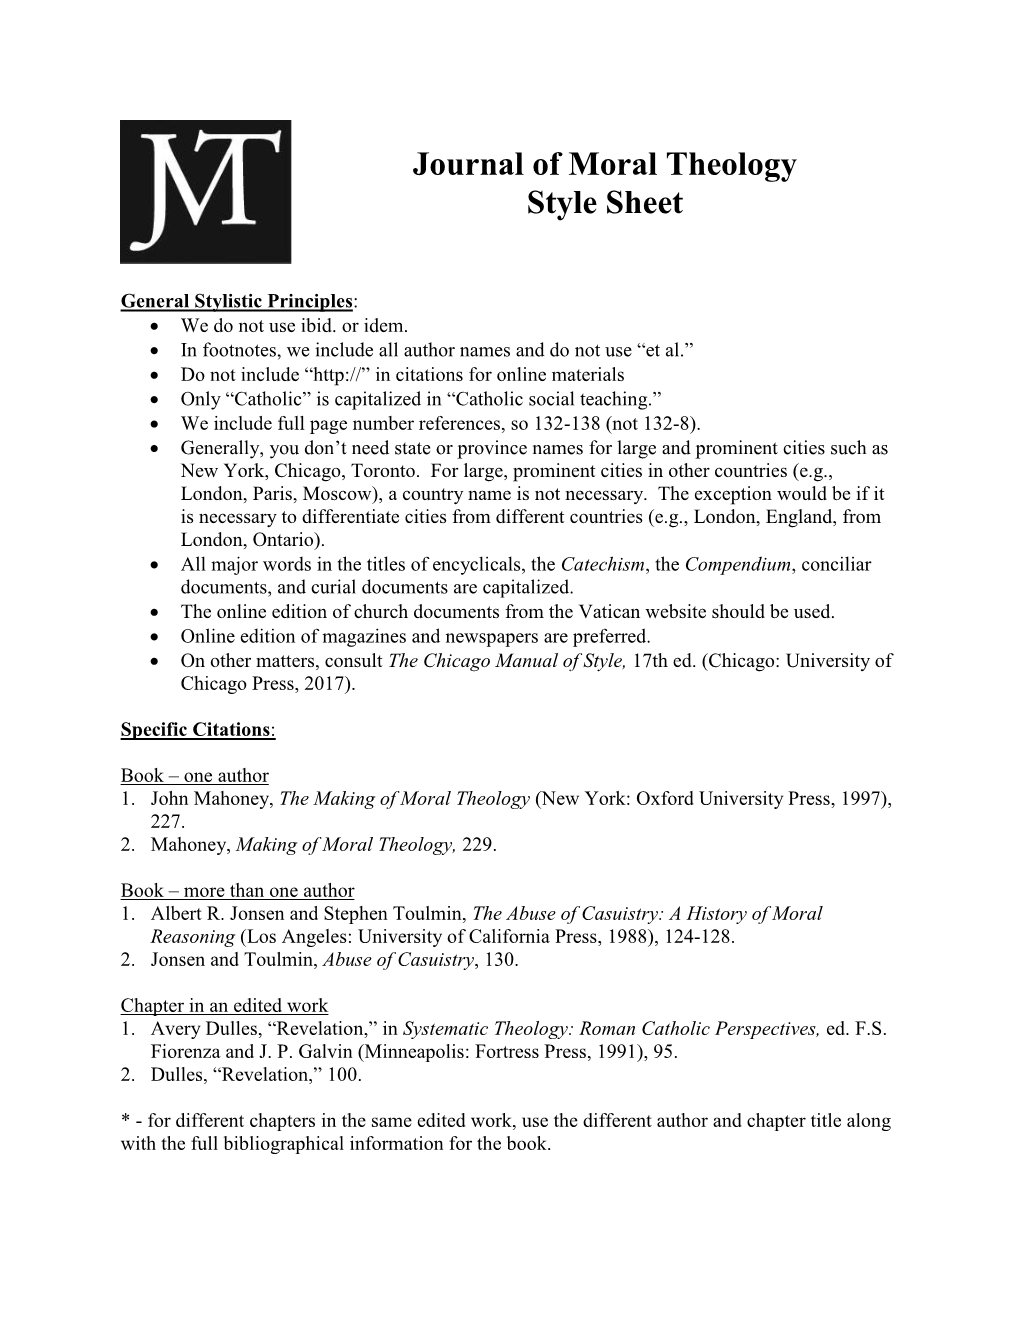 Journal of Moral Theology Style Sheet